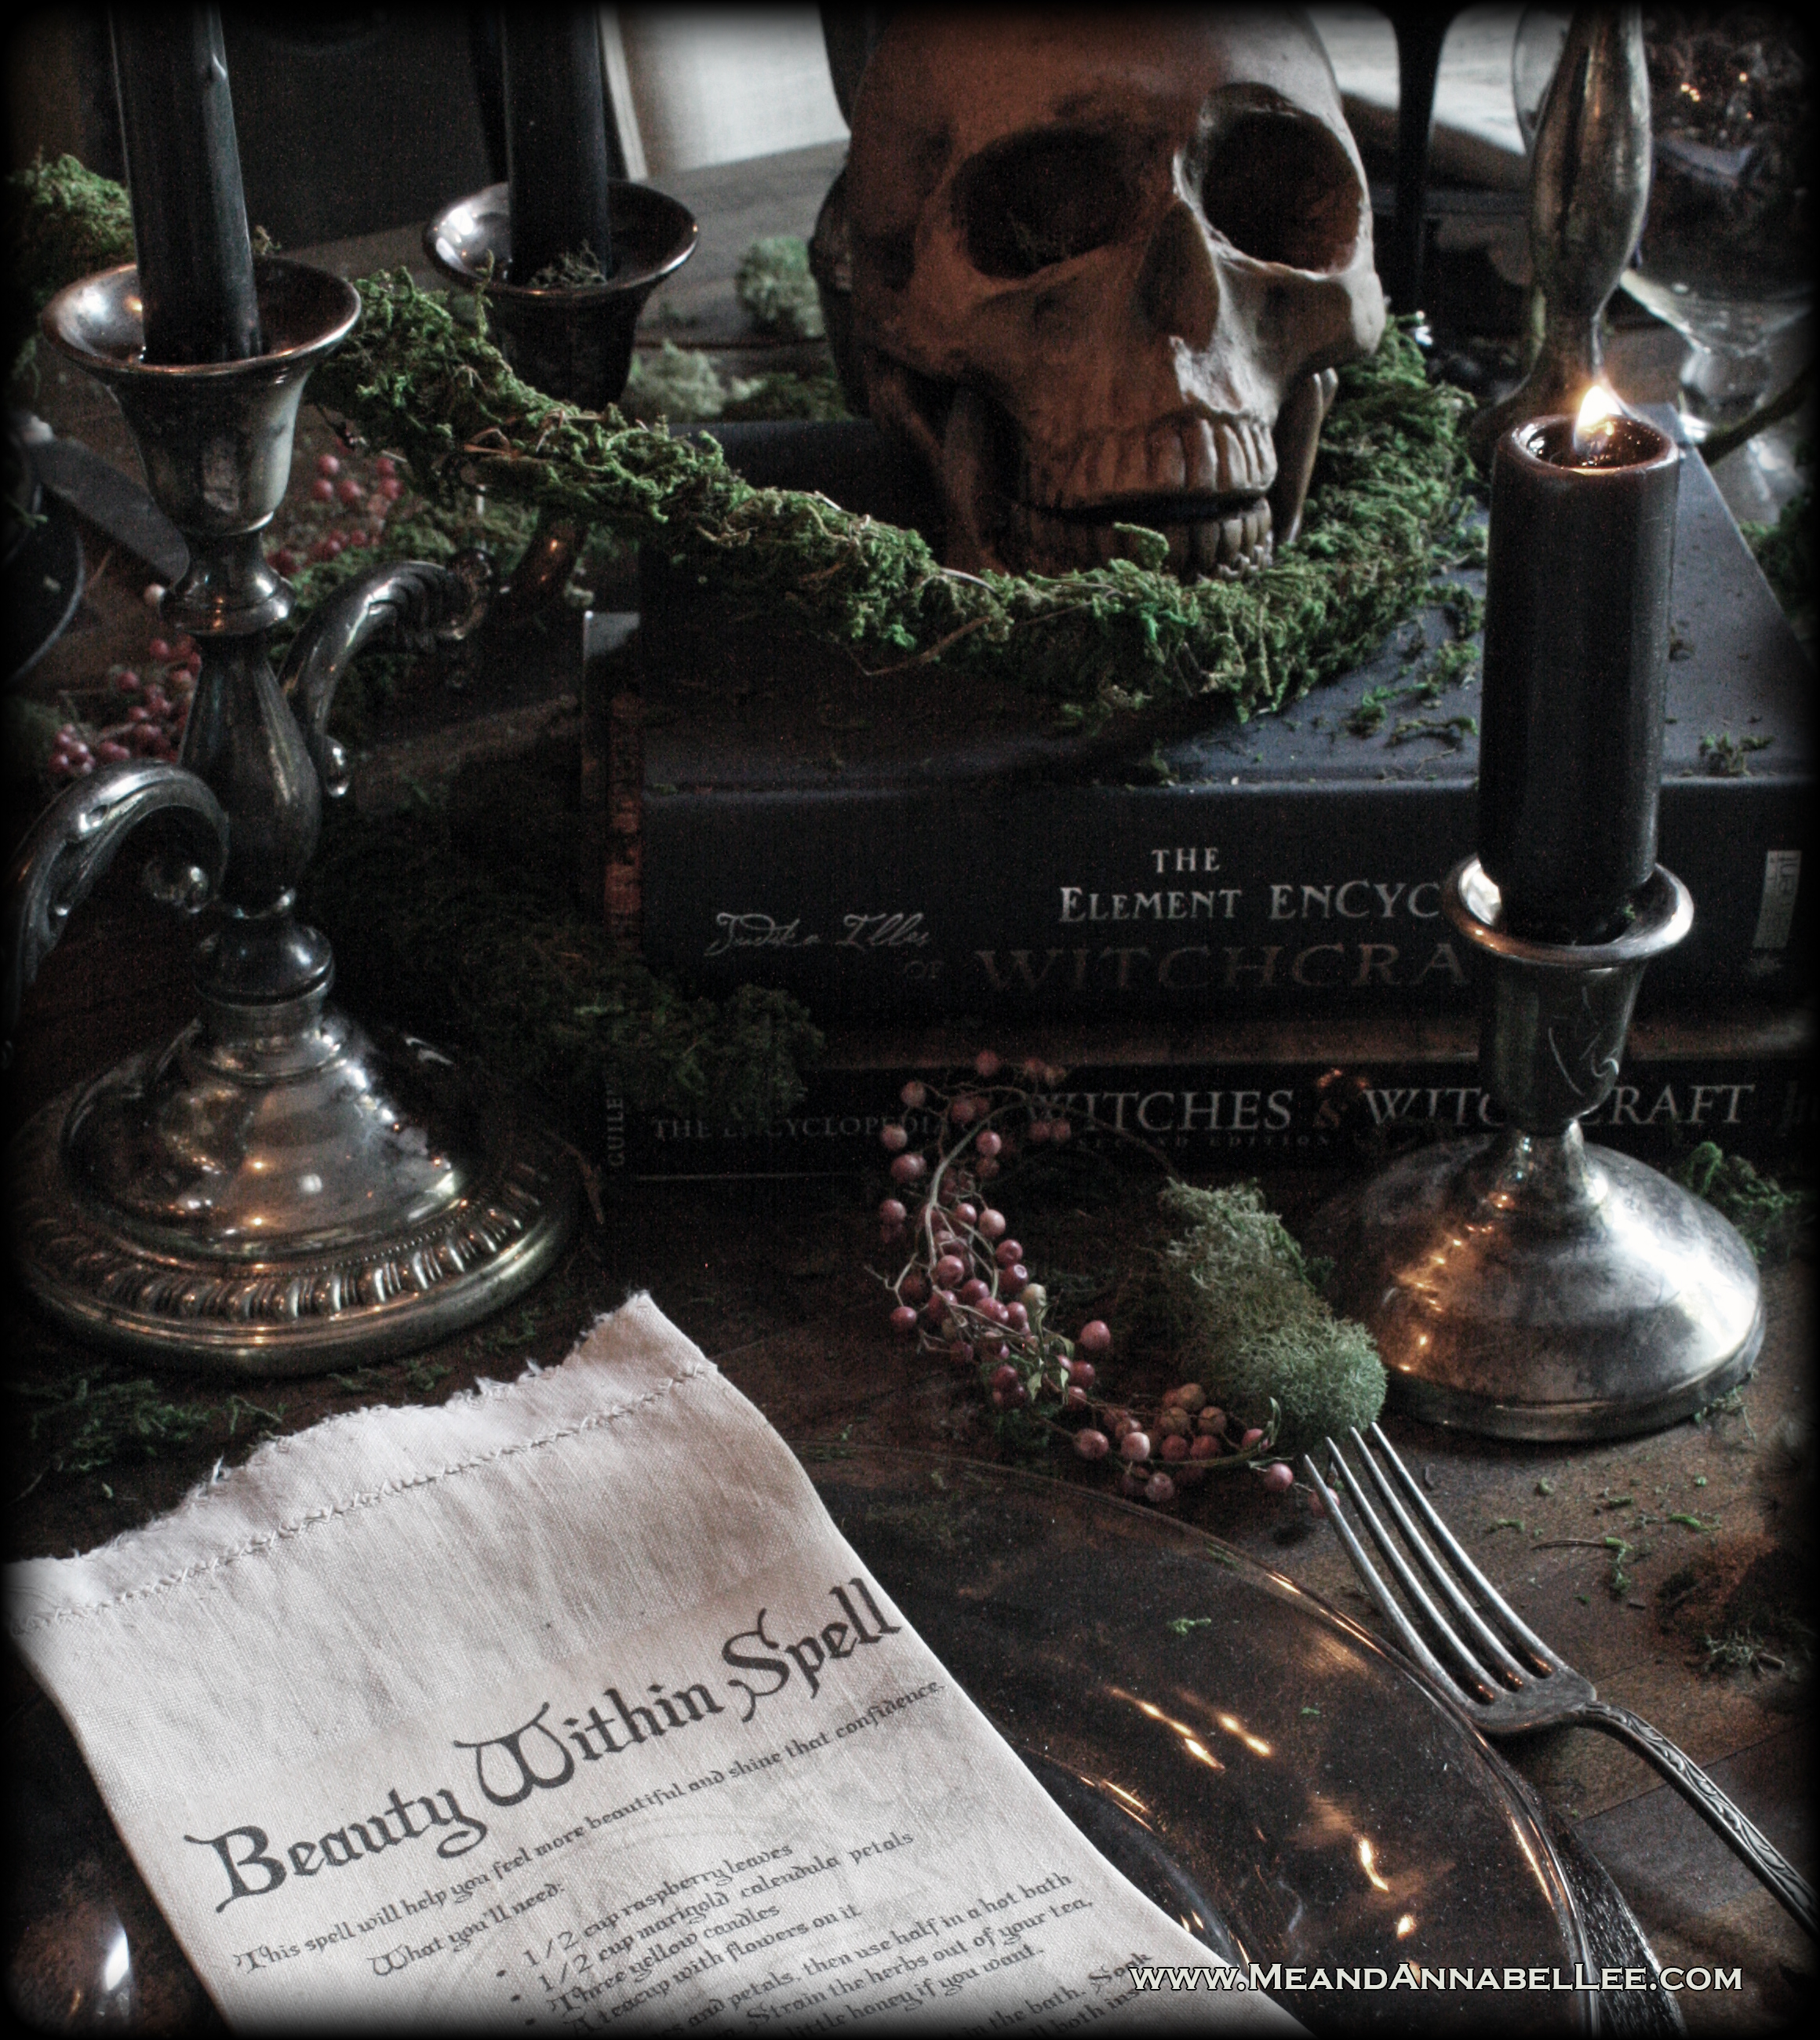 Witches Dinner Party | Witchcraft Books | Antique Gothic Candelabra | Moss Vines | Realistic Skull Prop | Elegant Halloween Table | DIY Spell Napkins | Goth Home Décor | www.MeandAnnabelLee.com